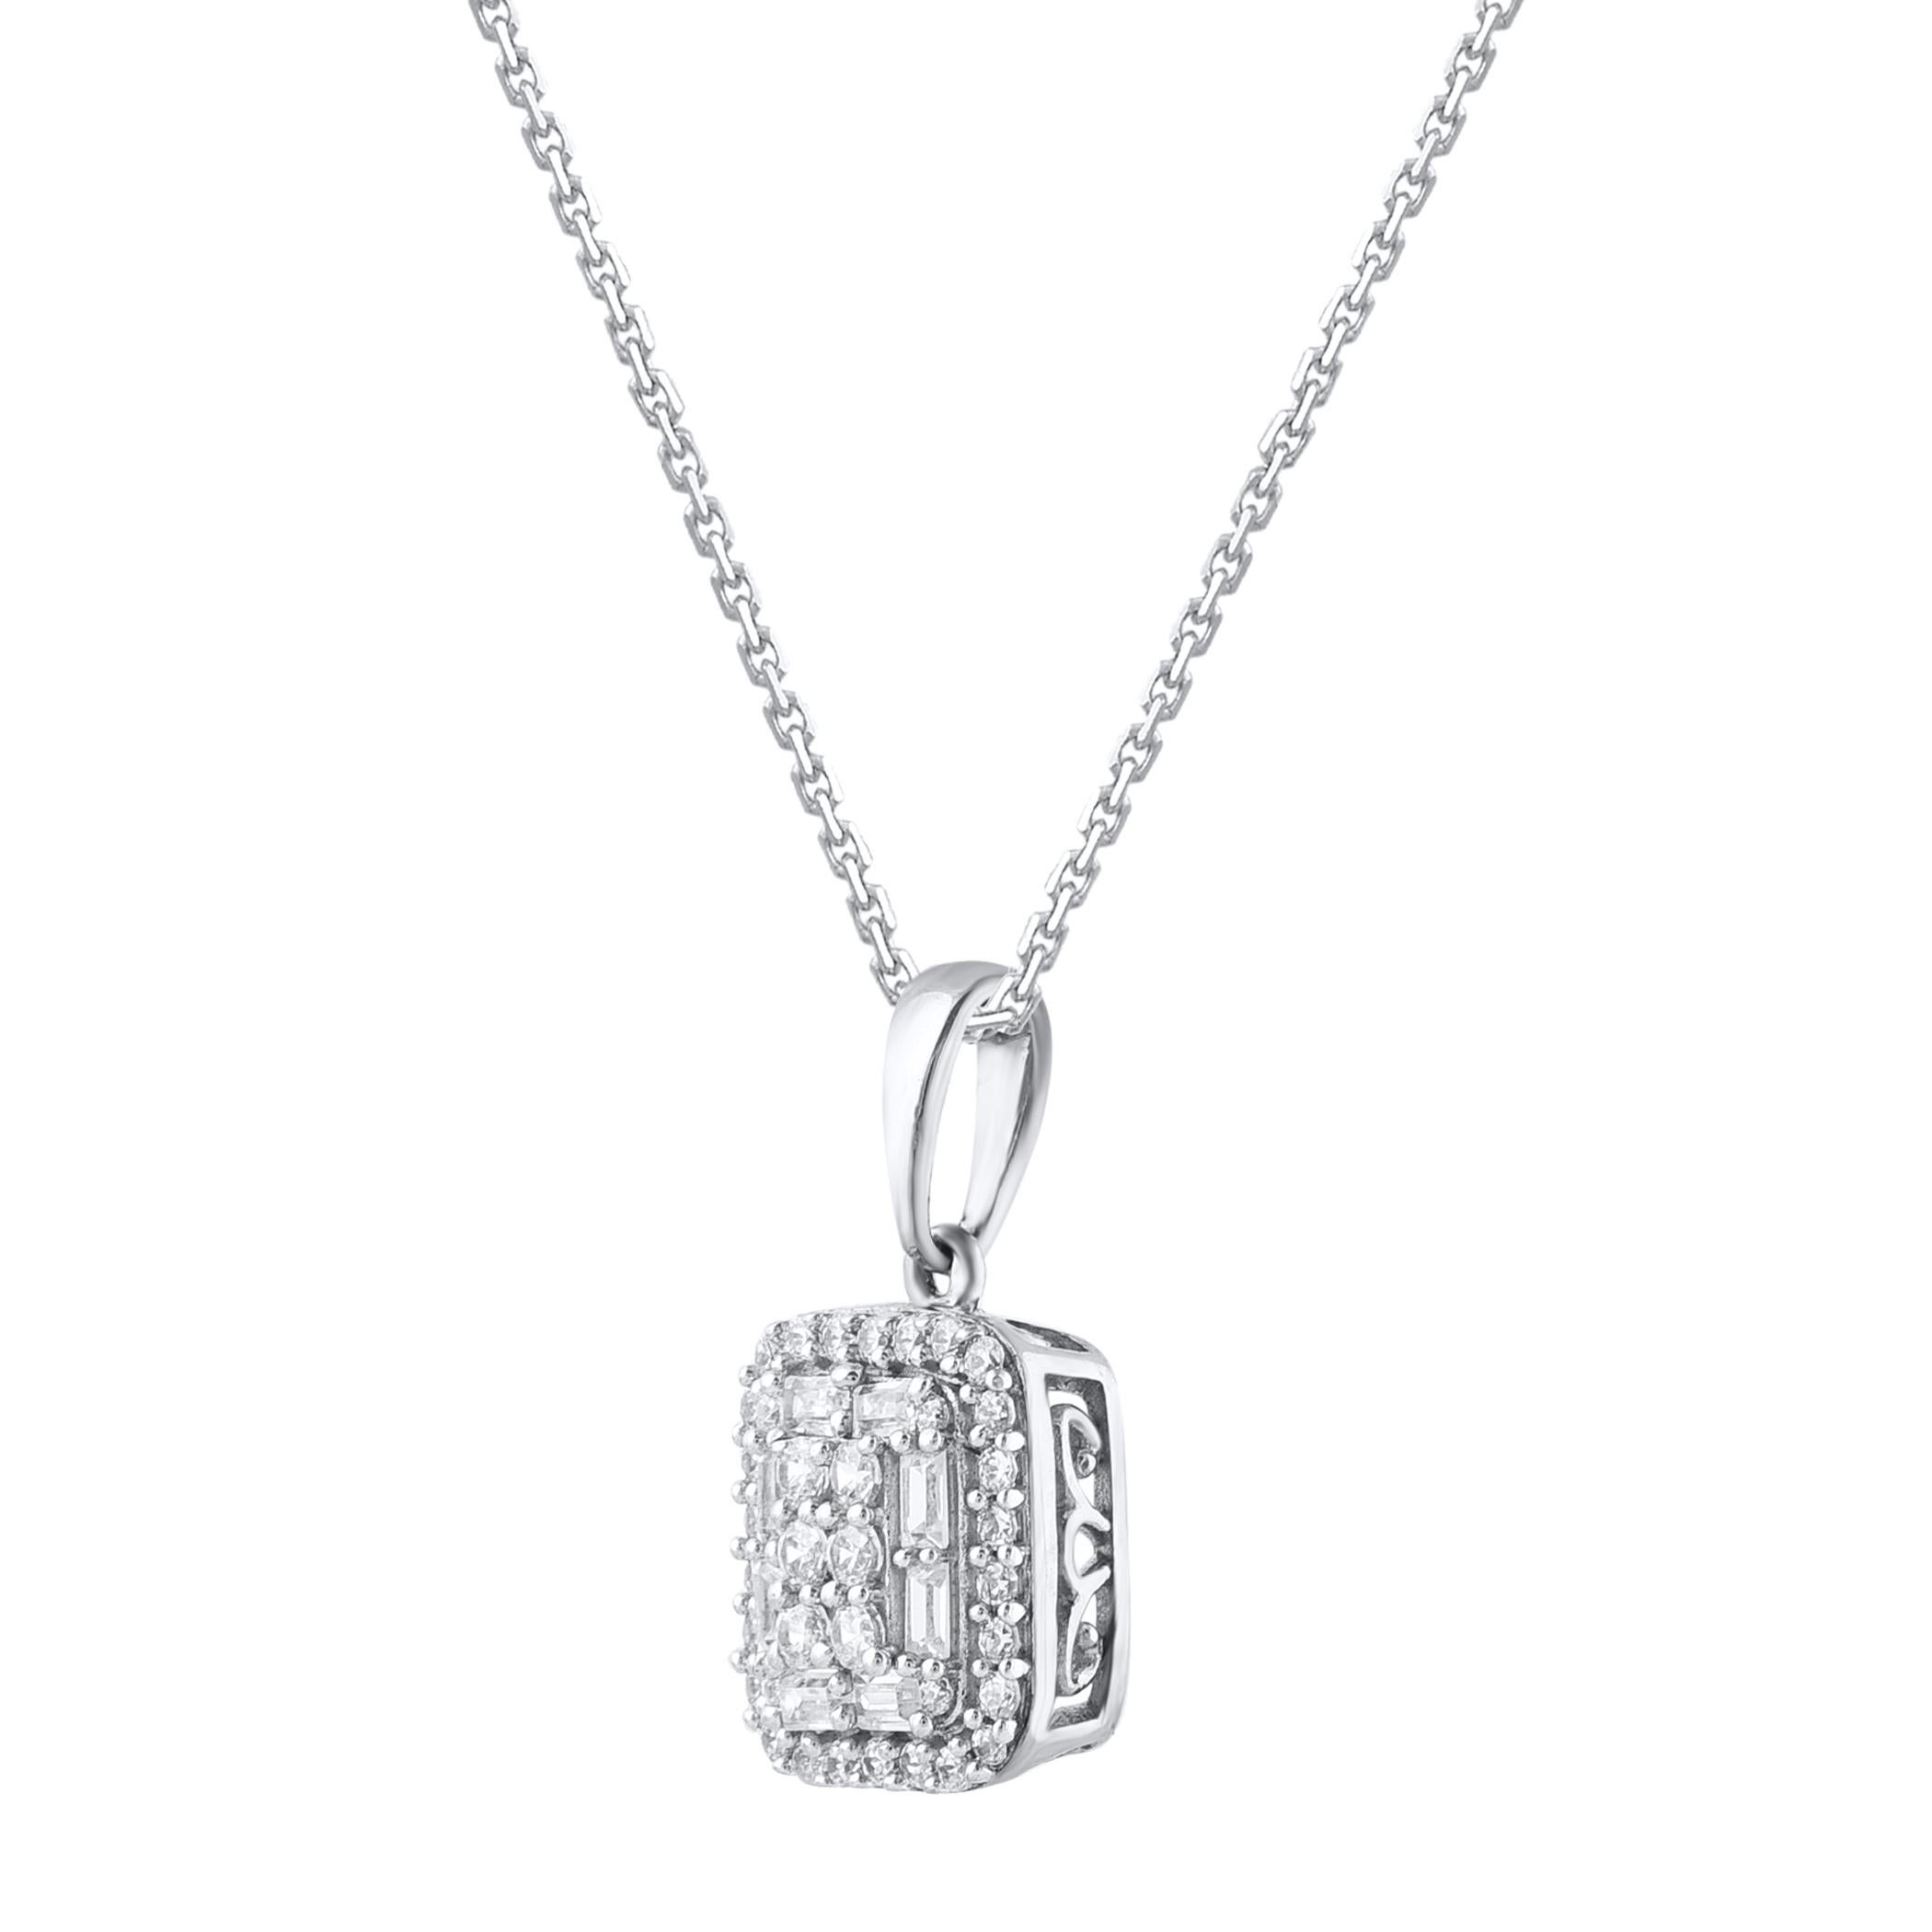 This beautiful cushion pendant necklace is studded with 44 single cut, brilliant cut and baguette cut natural diamonds in prong setting. The total diamond weight of these pendant is 0.25 carats. All the diamonds are H-I color, I-2 clarity. This